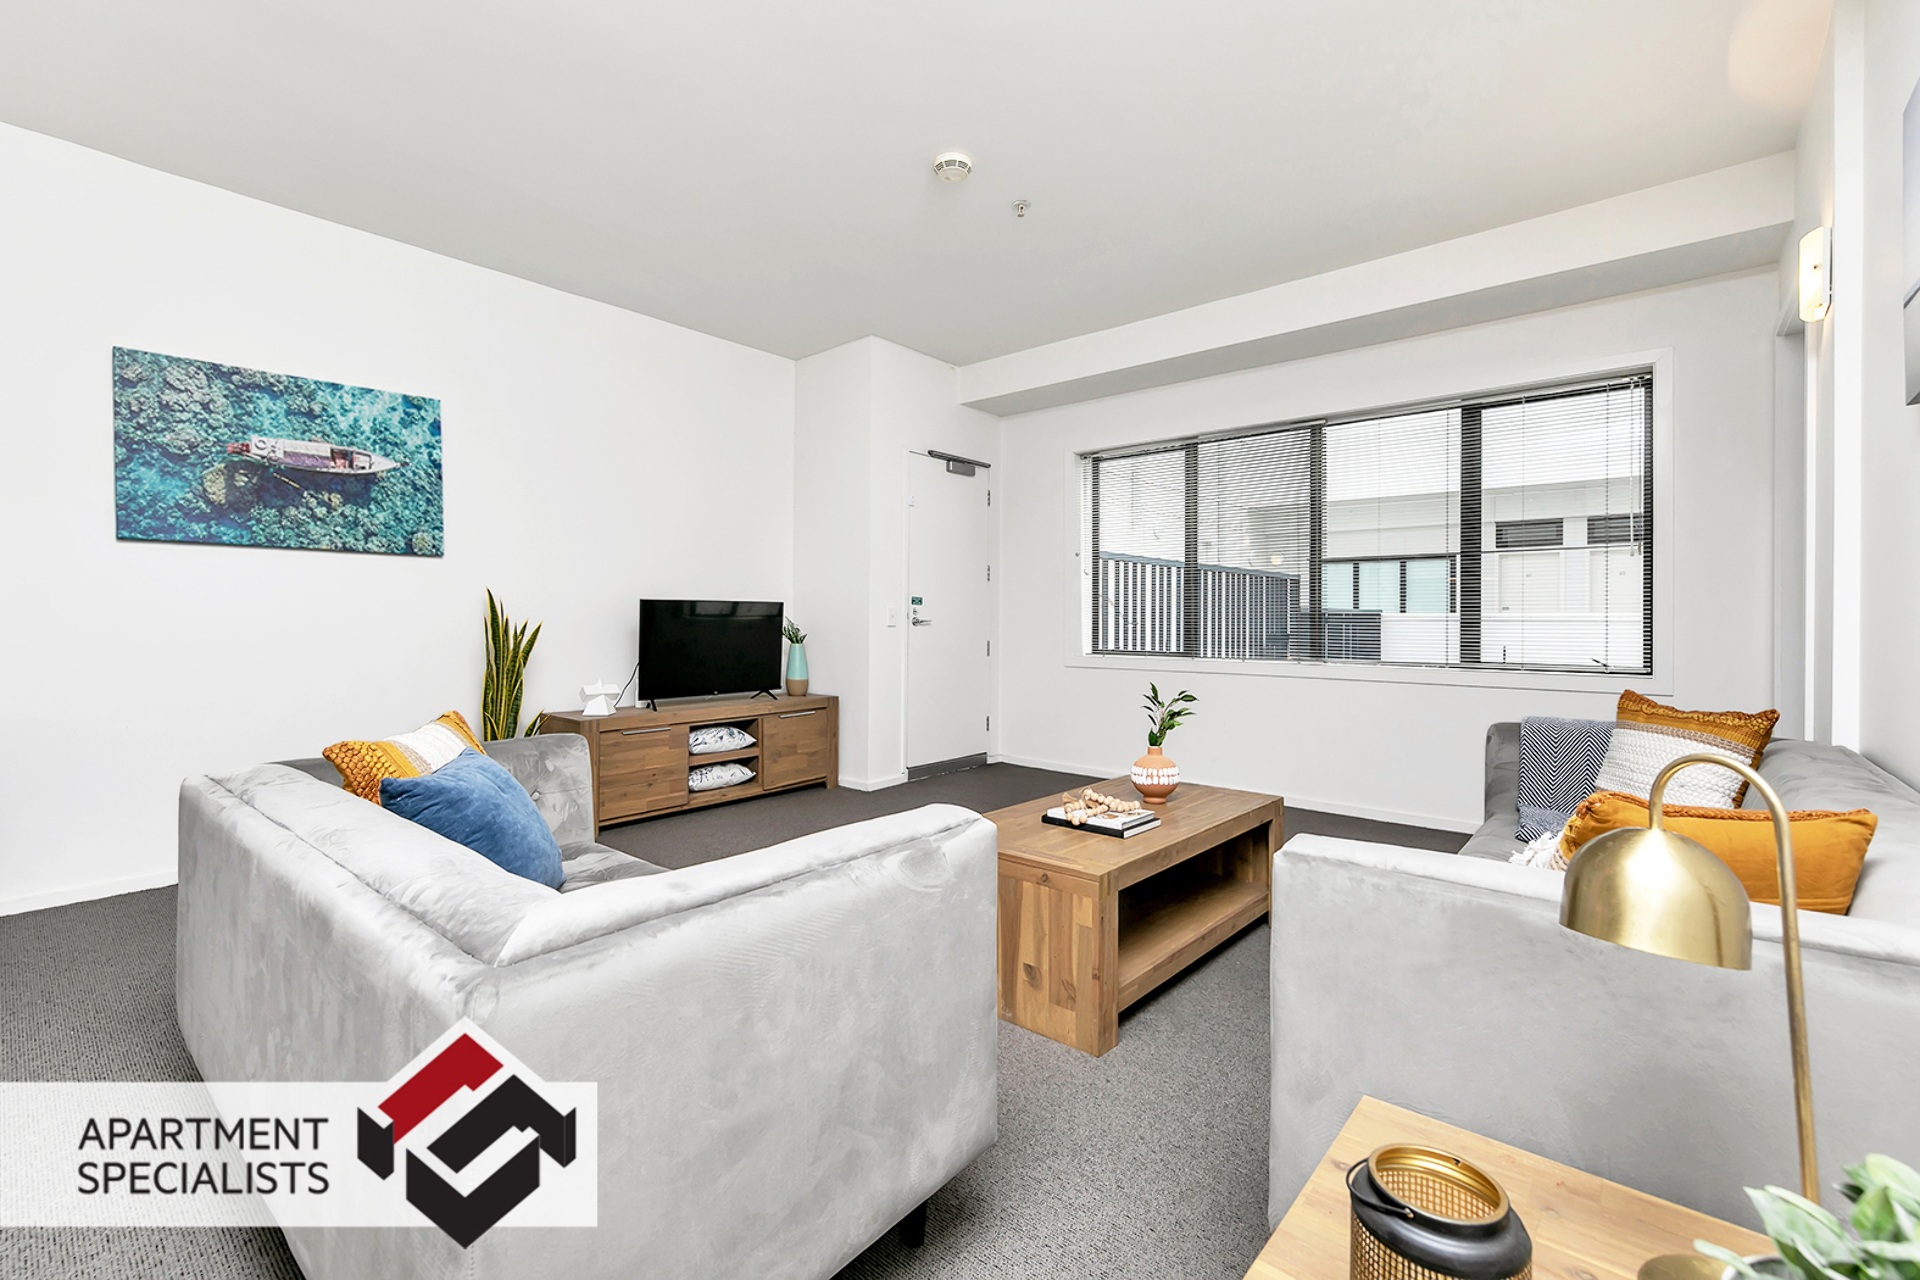 6 | 55 High Street, City Centre | Apartment Specialists